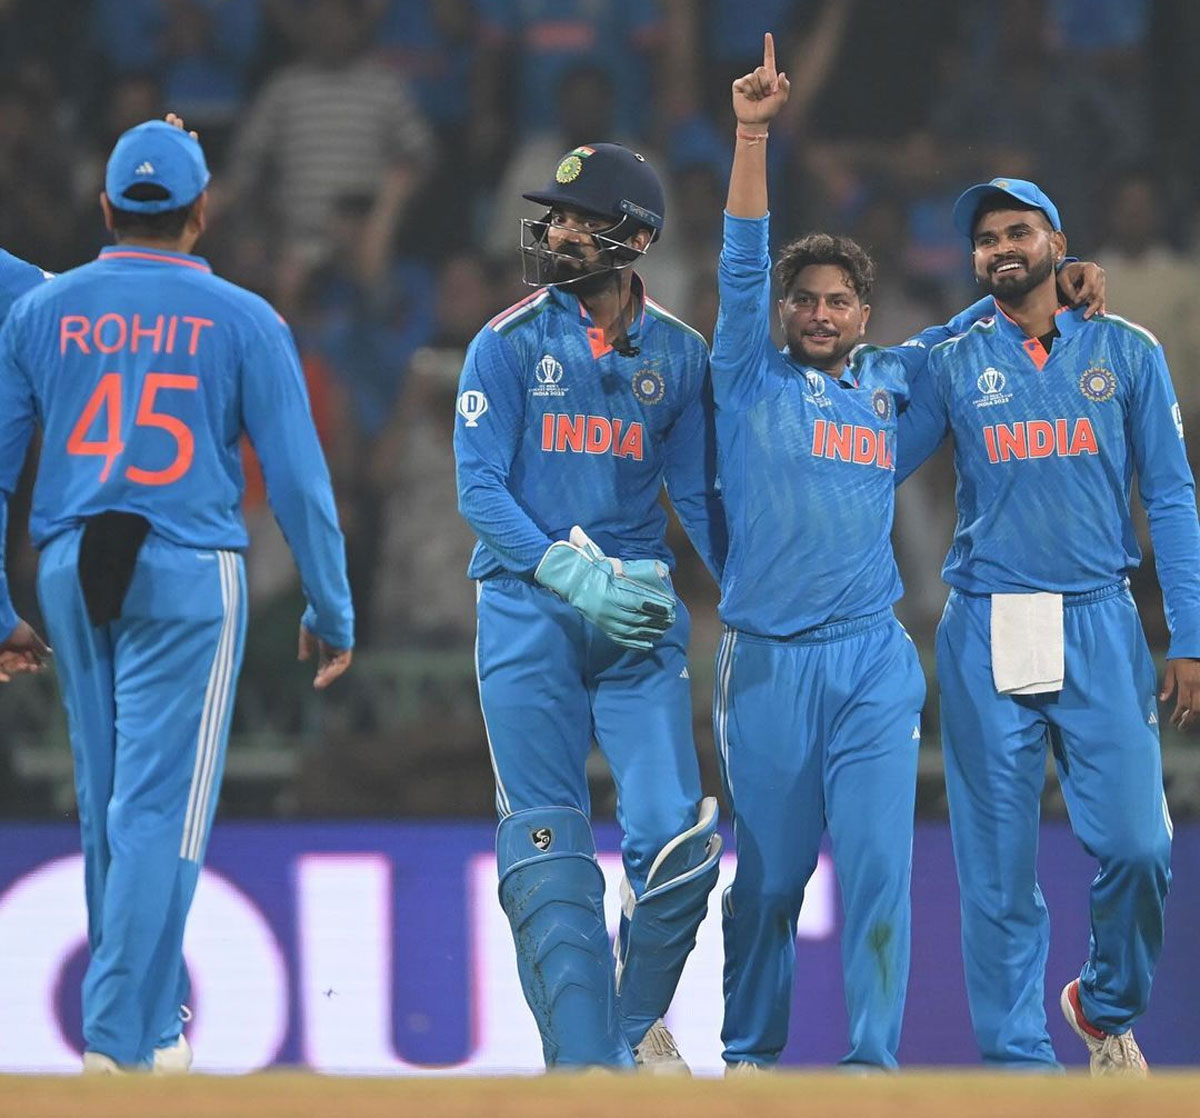 The Indian team is not worried about the past, having stumbled in the semi-final stage in 2015 and in 2019